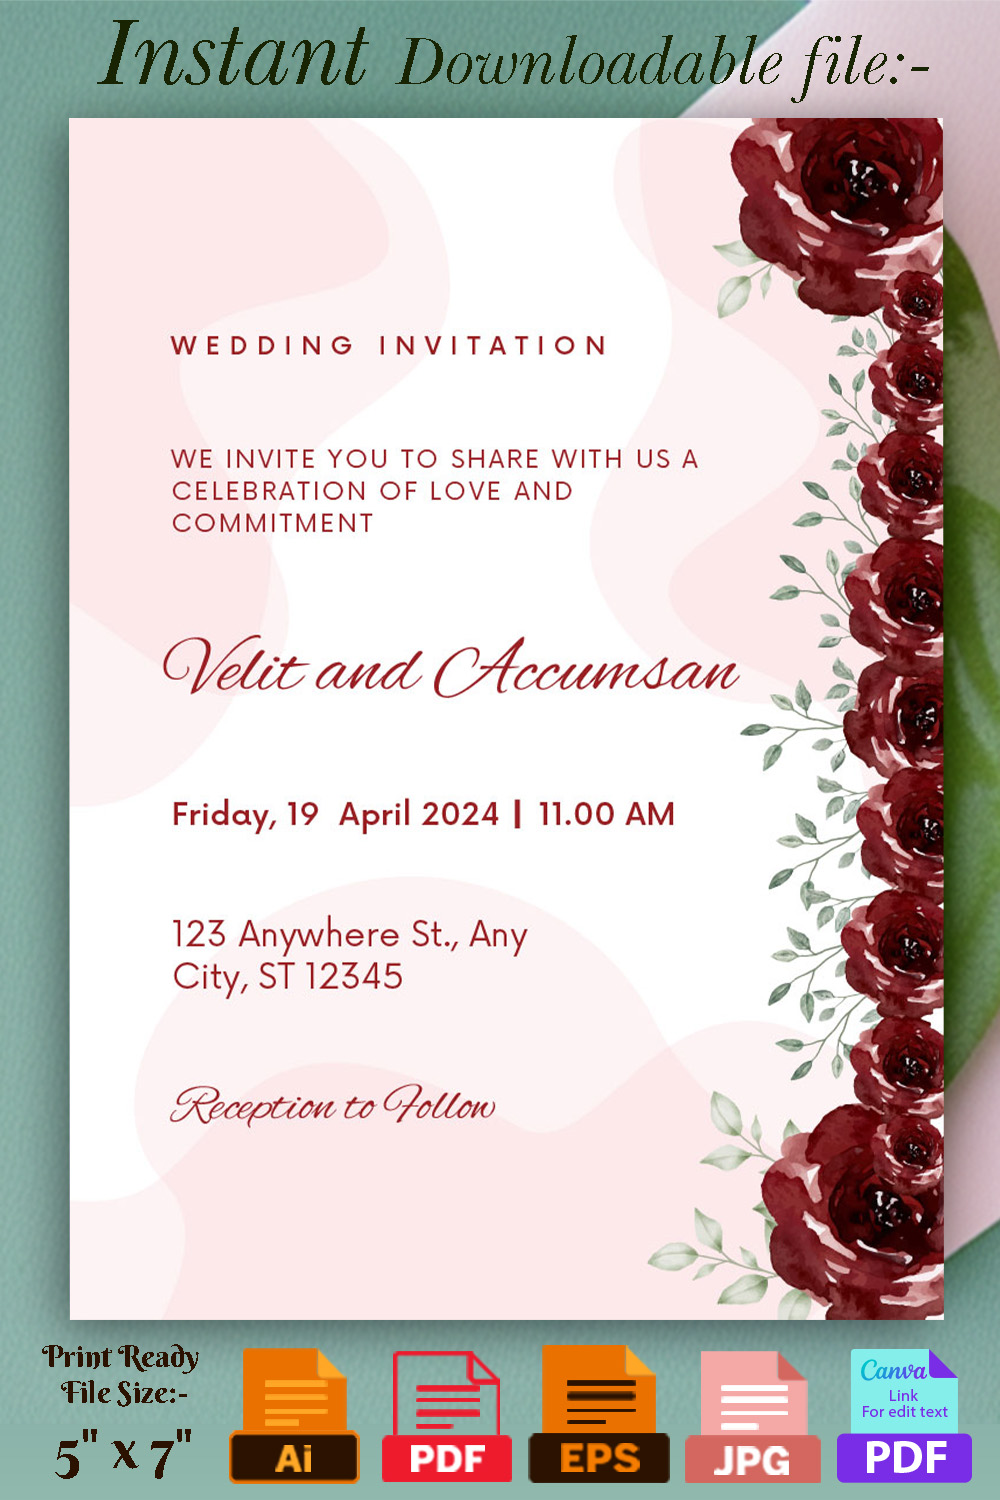 Image of charming wedding invitation with traditional design.